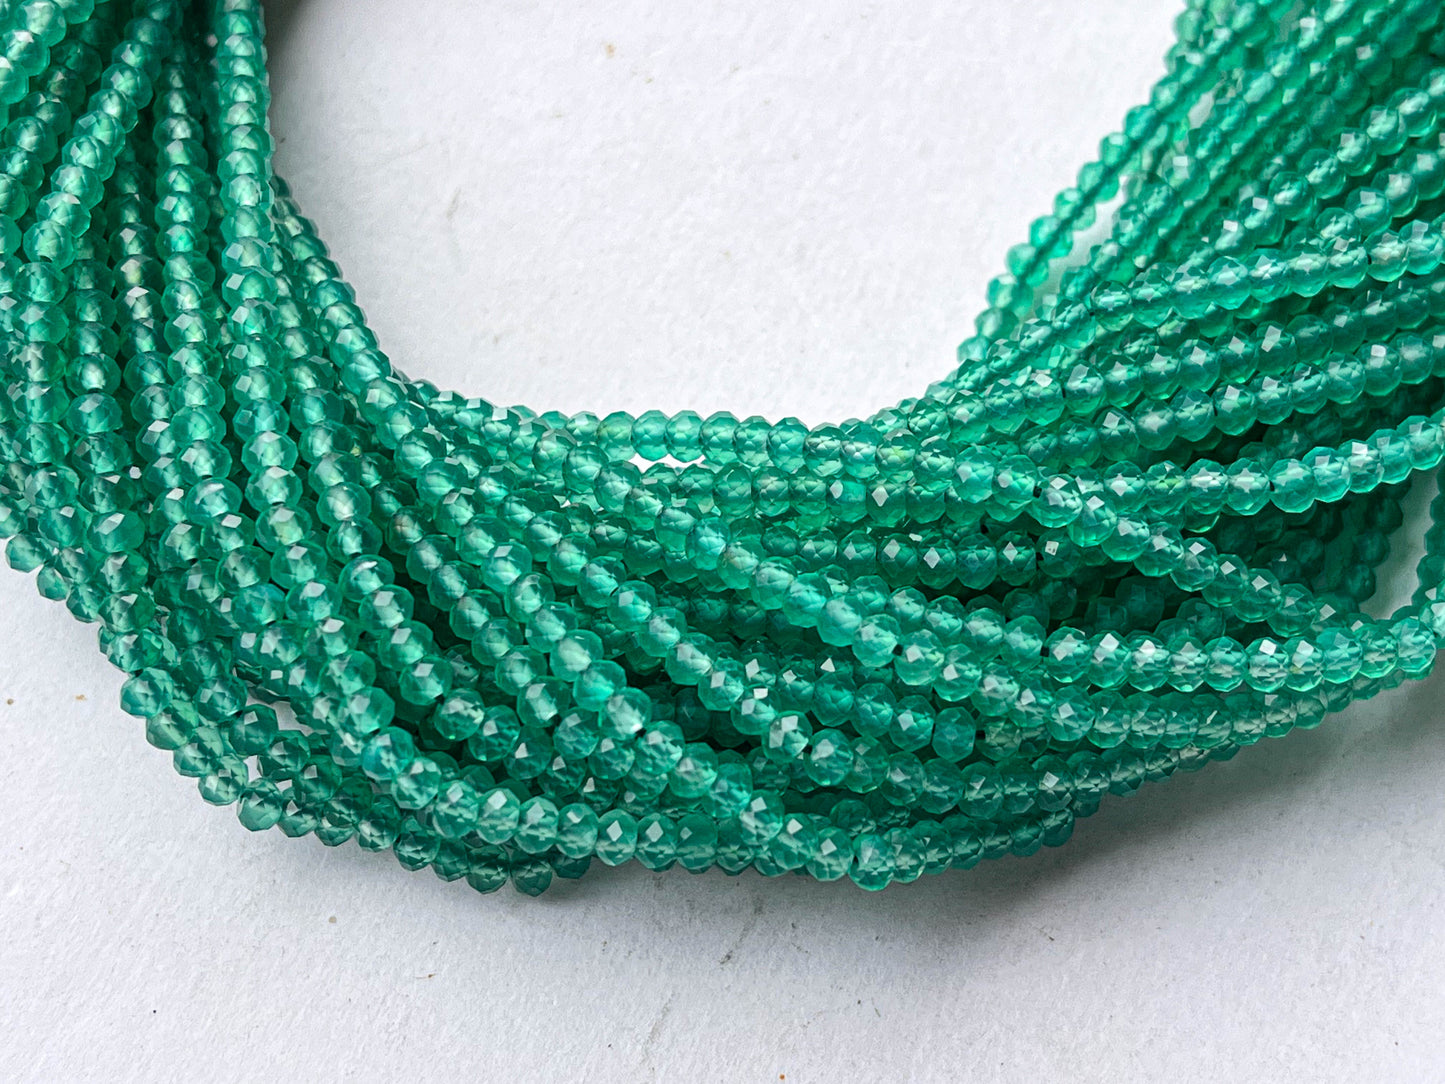 3mm AAA Green Onyx Micro Faceted Round Beads Beadsforyourjewelry